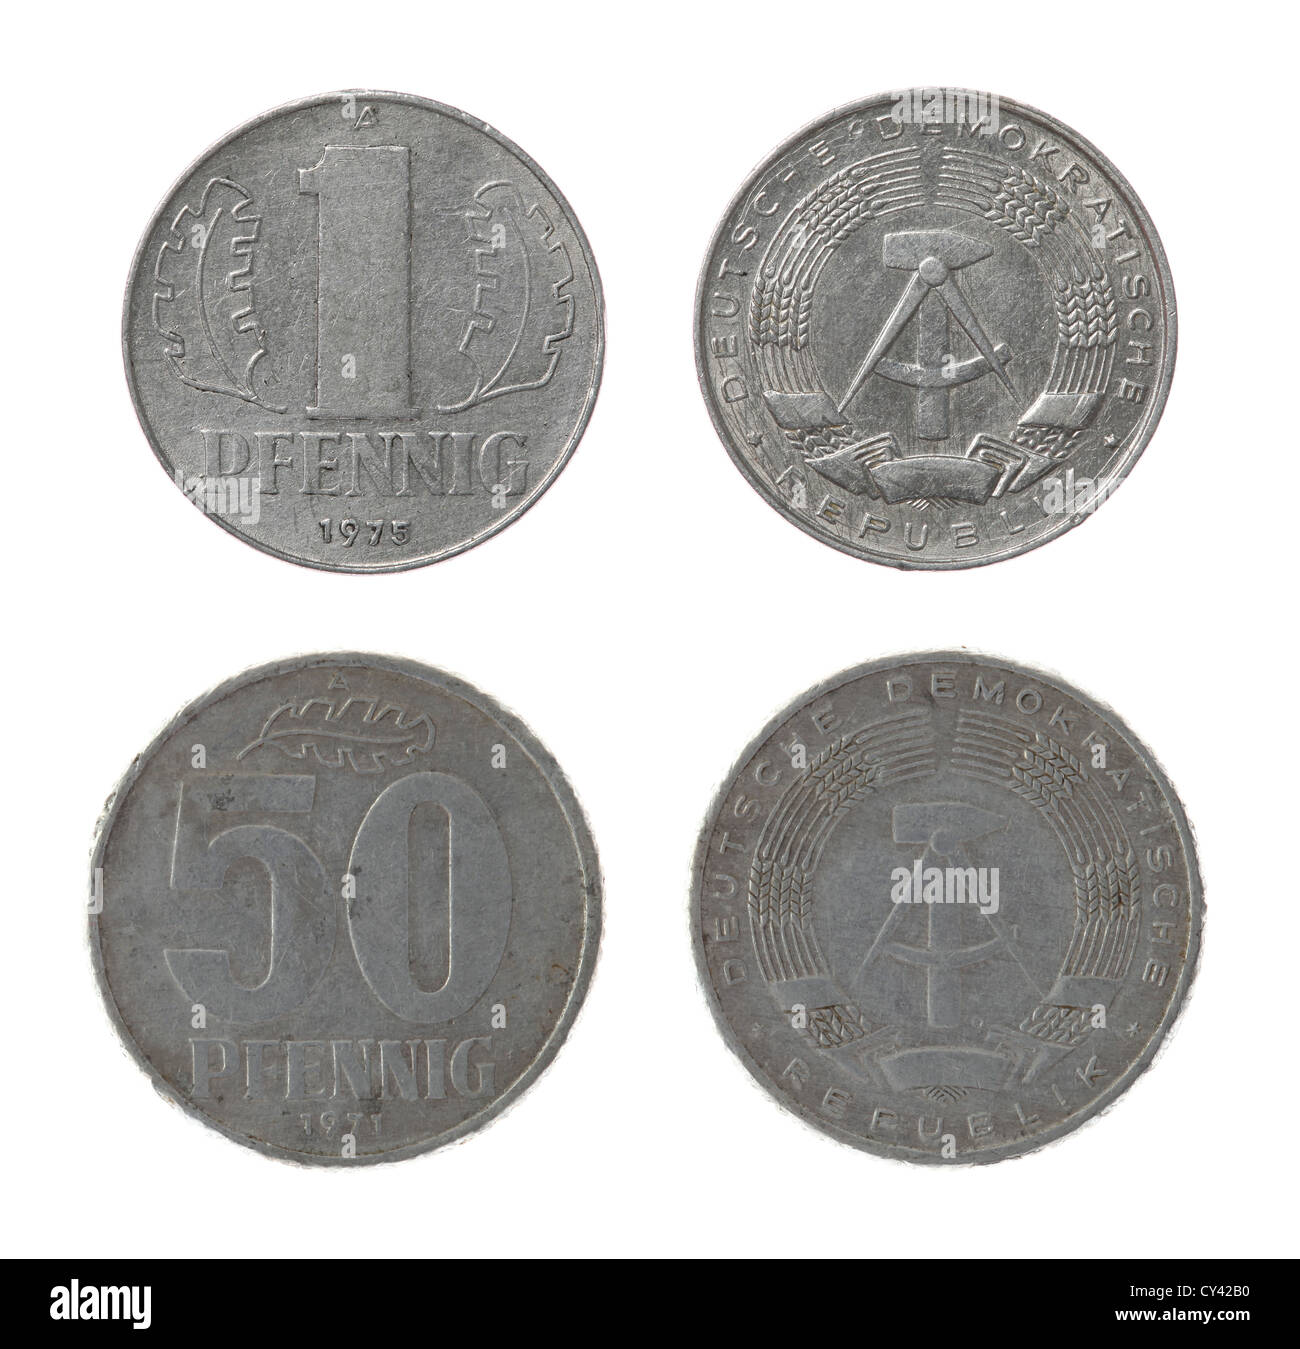 East German pfennig coins isolated on white Stock Photo